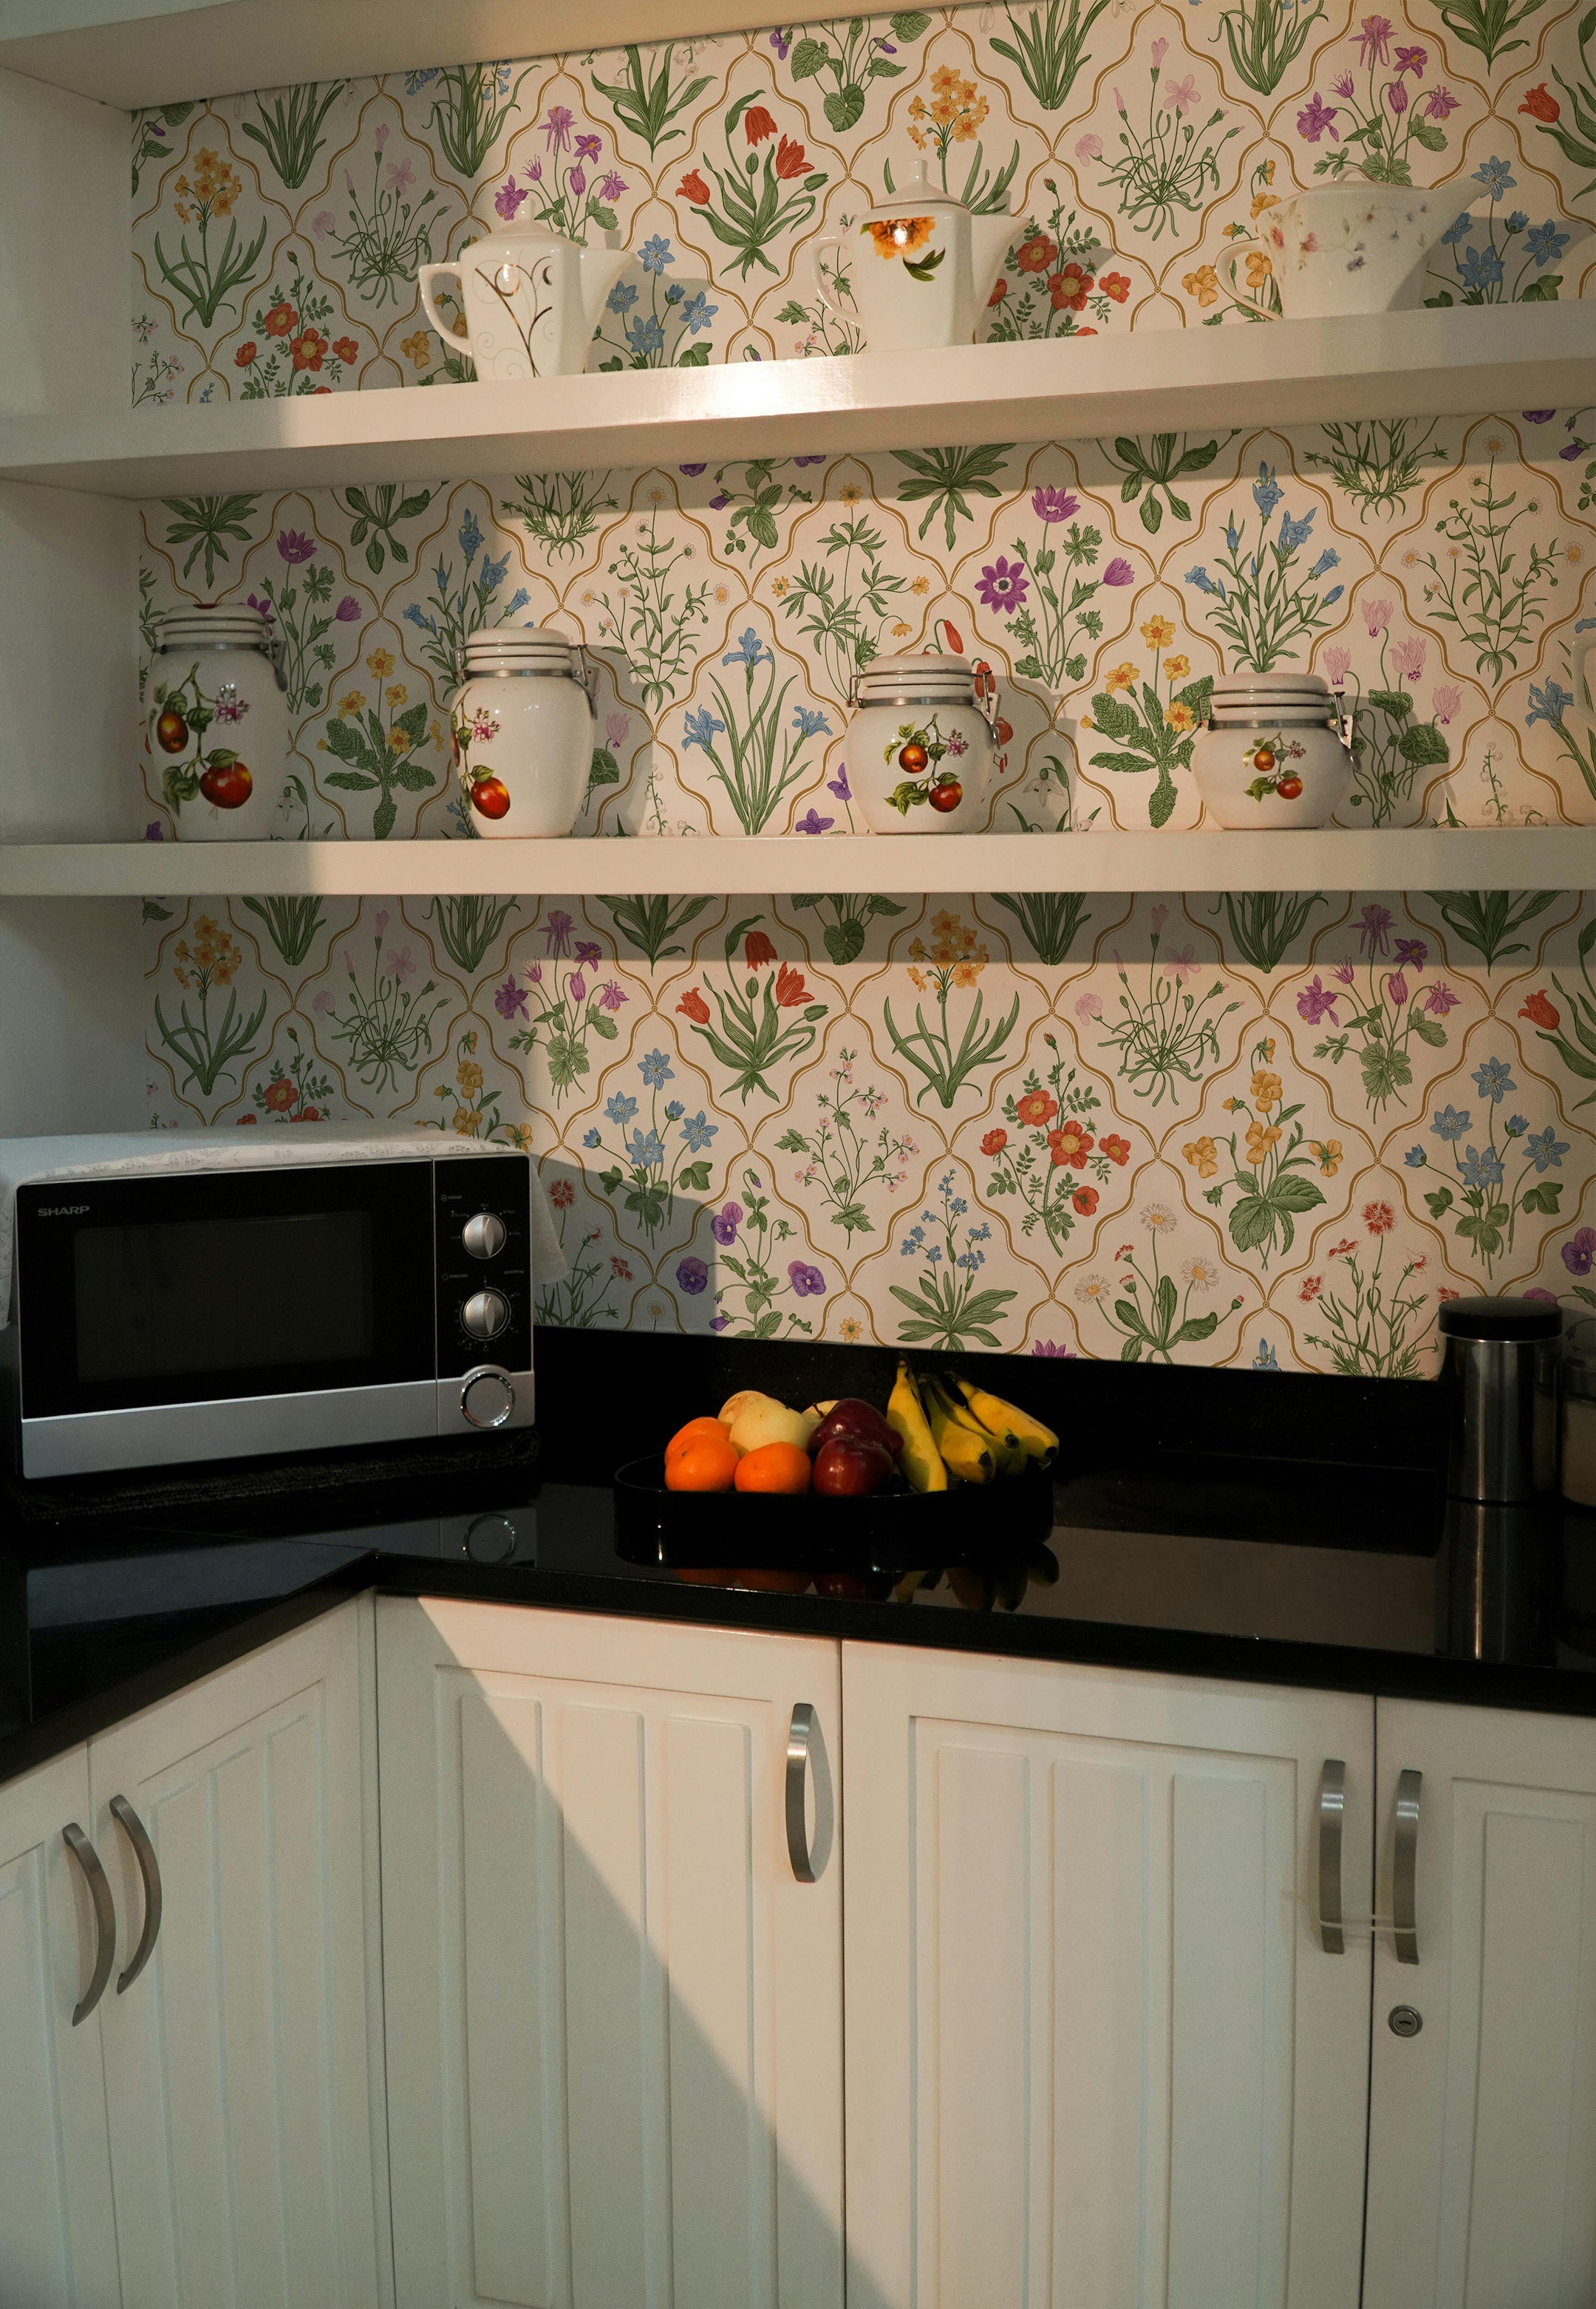 A vibrant kitchen wallpaper with a dense, colorful floral pattern featuring a variety of flowers and plants such as tulips, daisies, and bluebells. The backdrop has a warm white base with each flower meticulously illustrated in realistic colors, giving the space a lively and cheerful atmosphere.